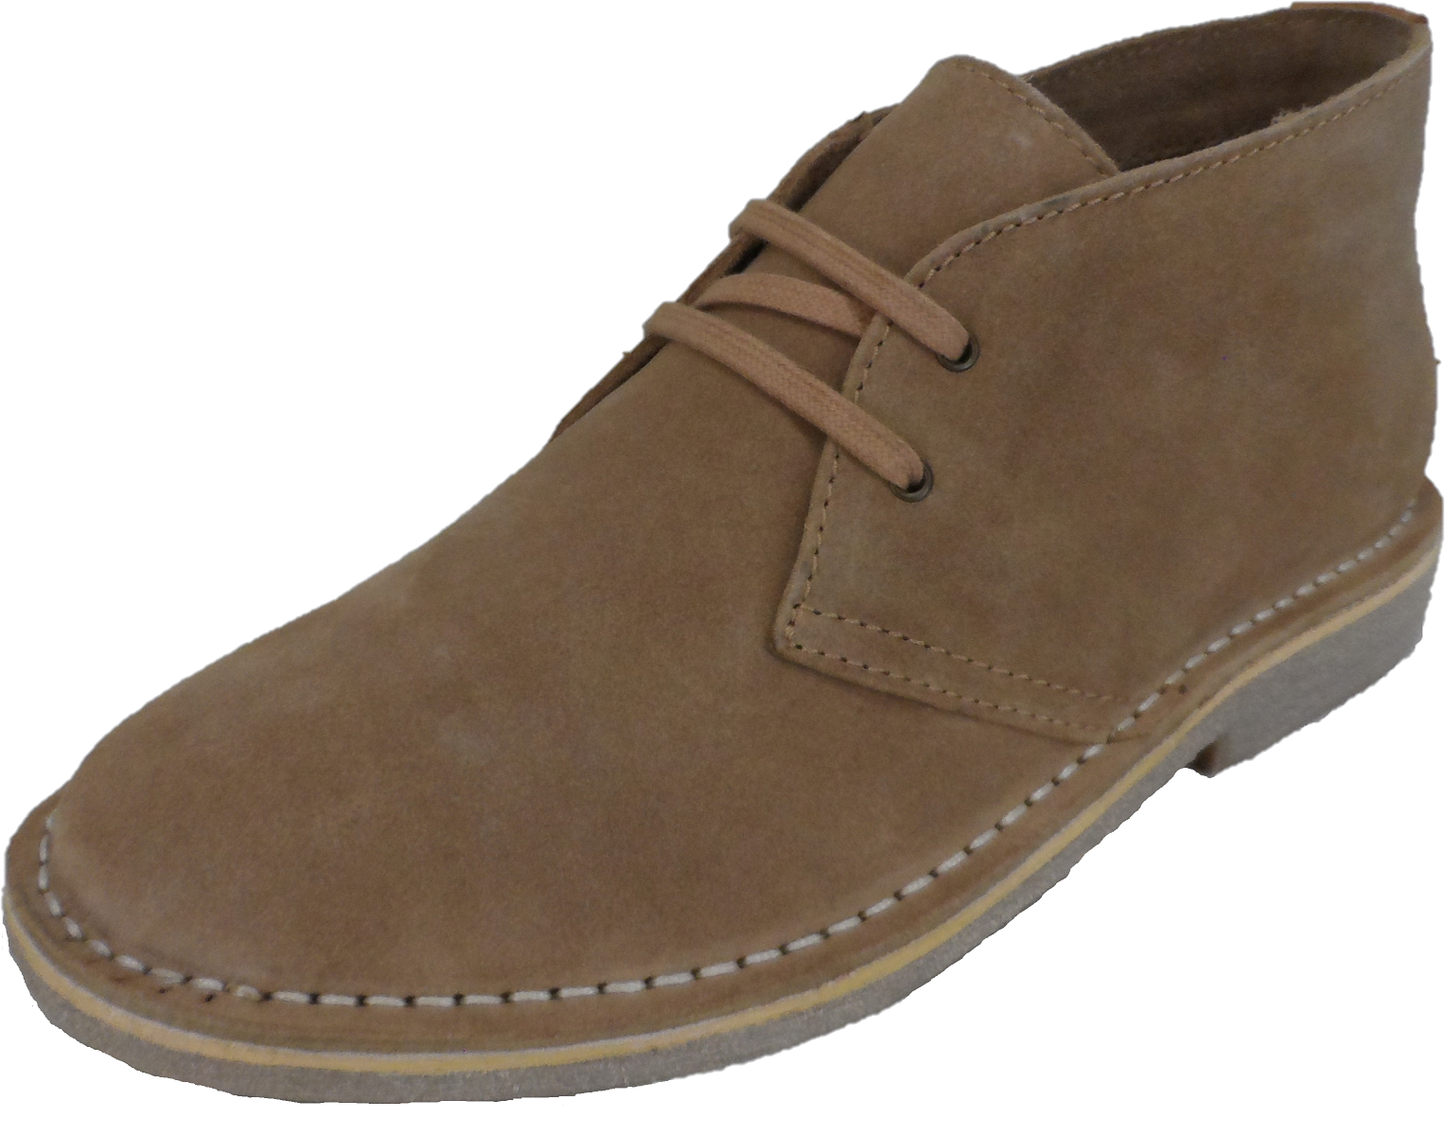 Hush Puppies Mens Sand 2 Eyelet Real Suede Desert Boots